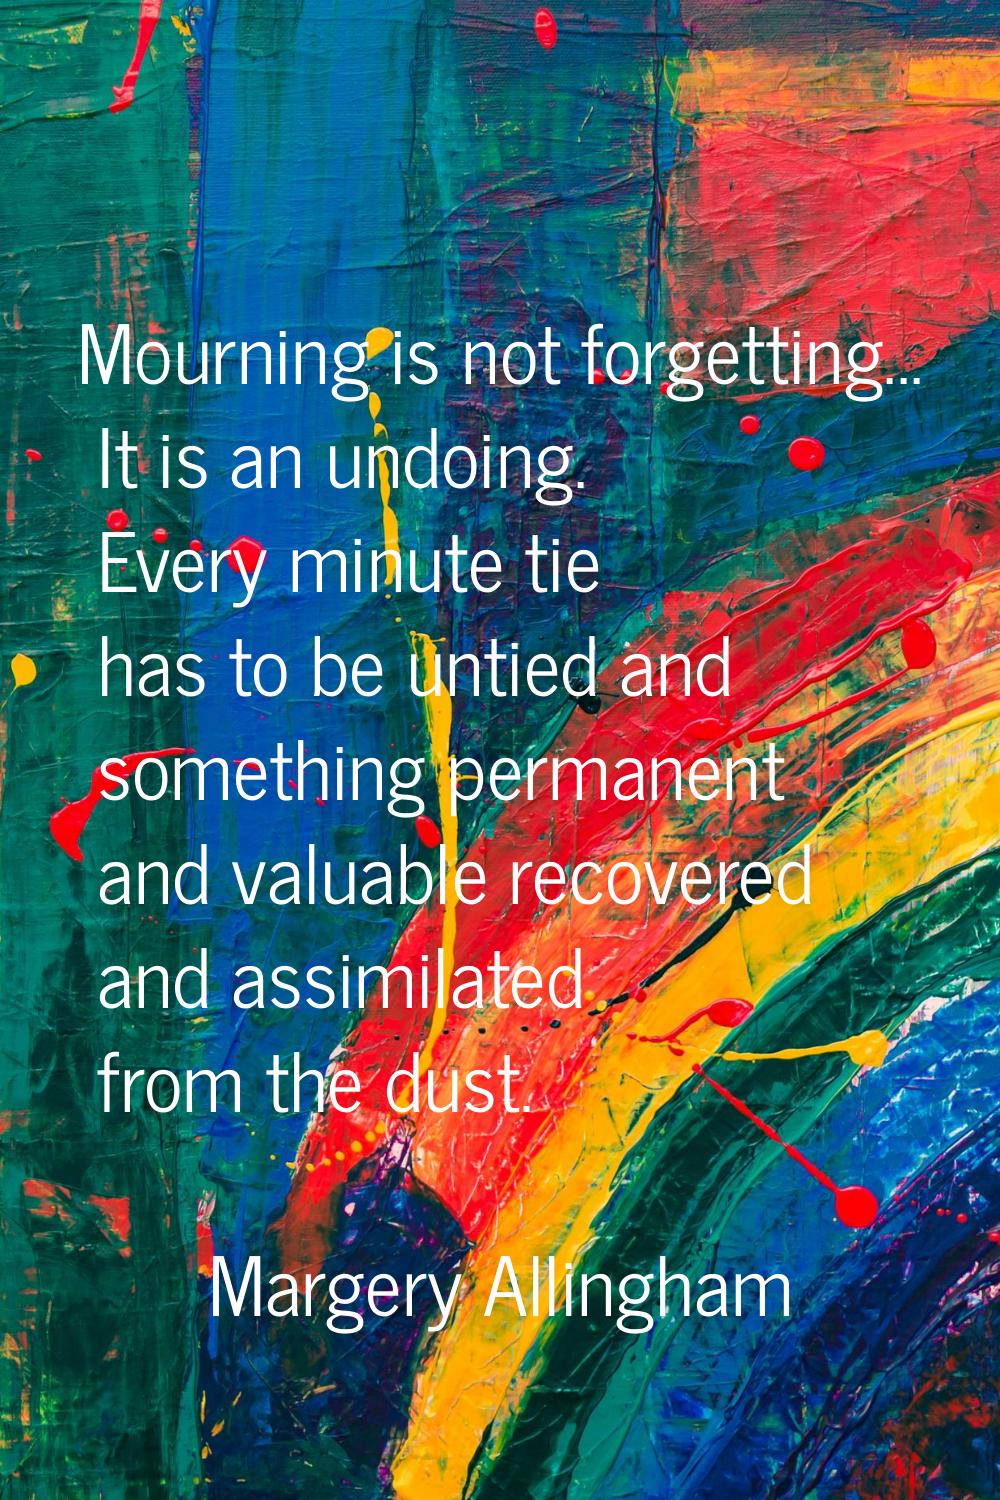 Mourning is not forgetting... It is an undoing. Every minute tie has to be untied and something per